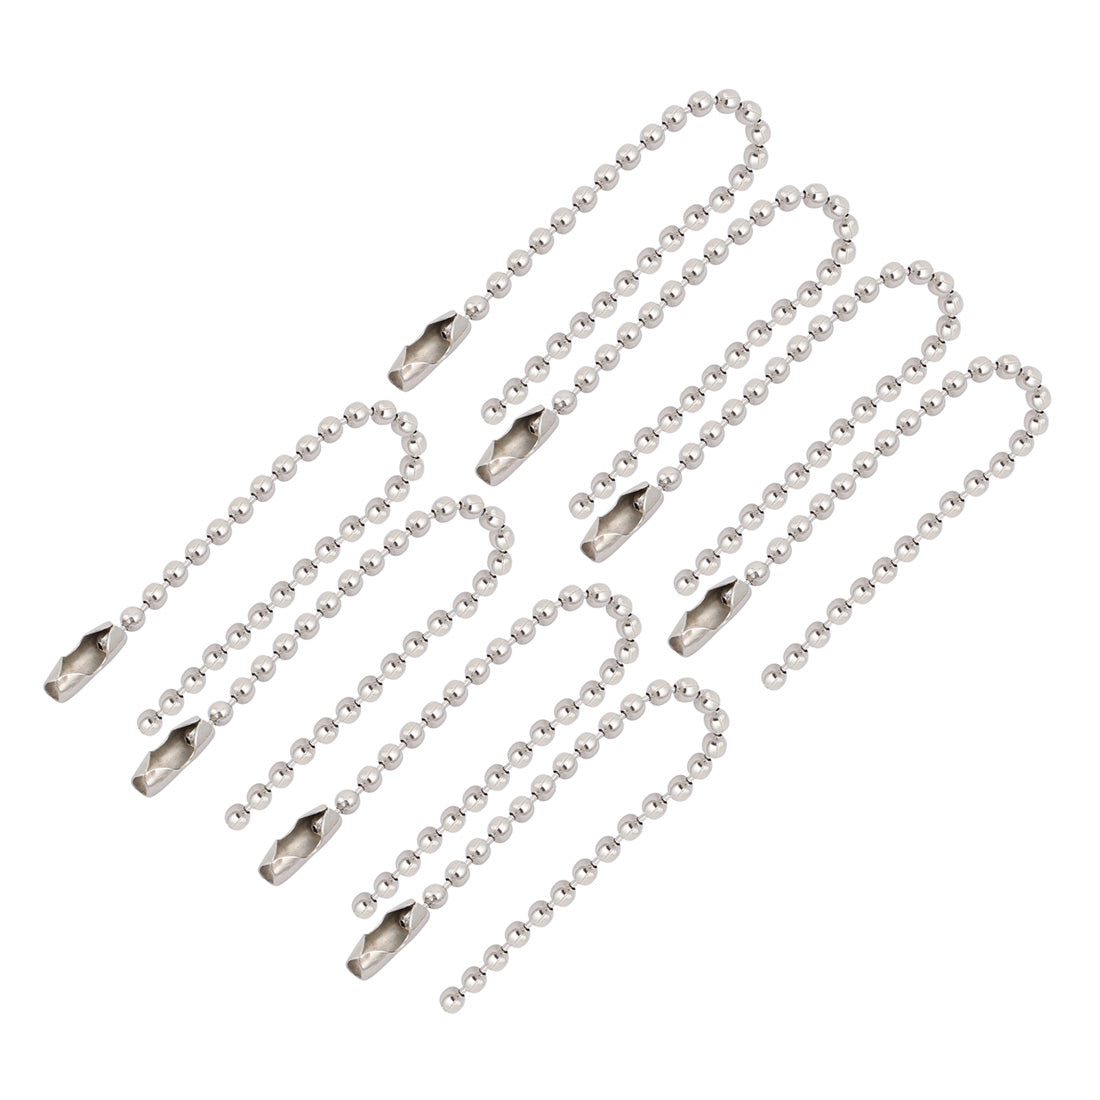 uxcell Uxcell 8pcs Metal Clasp Ball Chain Keychain Silver Tone 2.4mm Dia 10cm Length